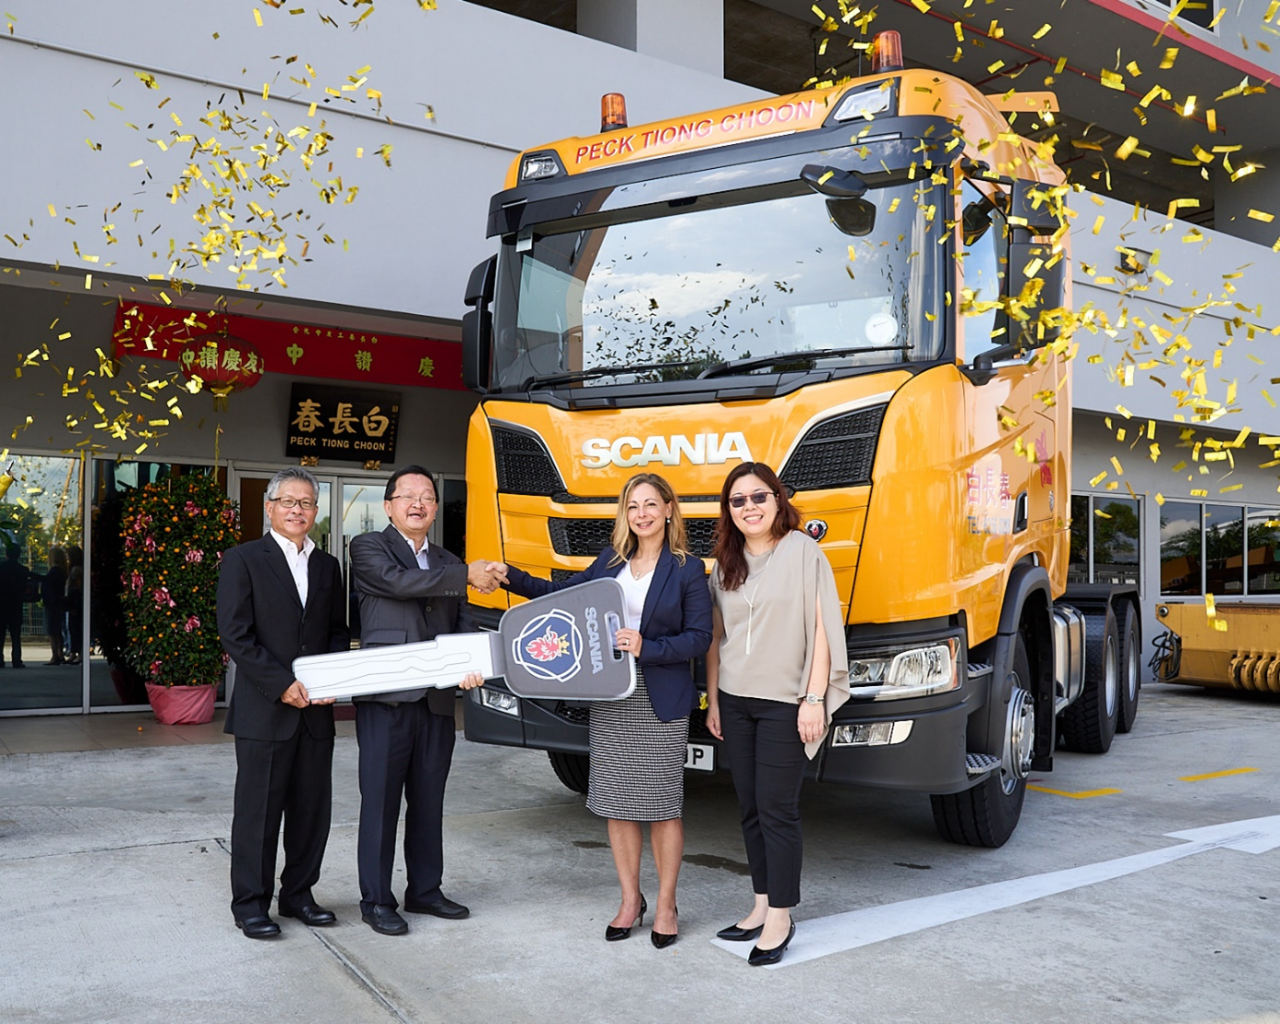 Peck Tiong Choon is first in Singapore to power ahead with the Scania V8 engine with 770 horsepower 